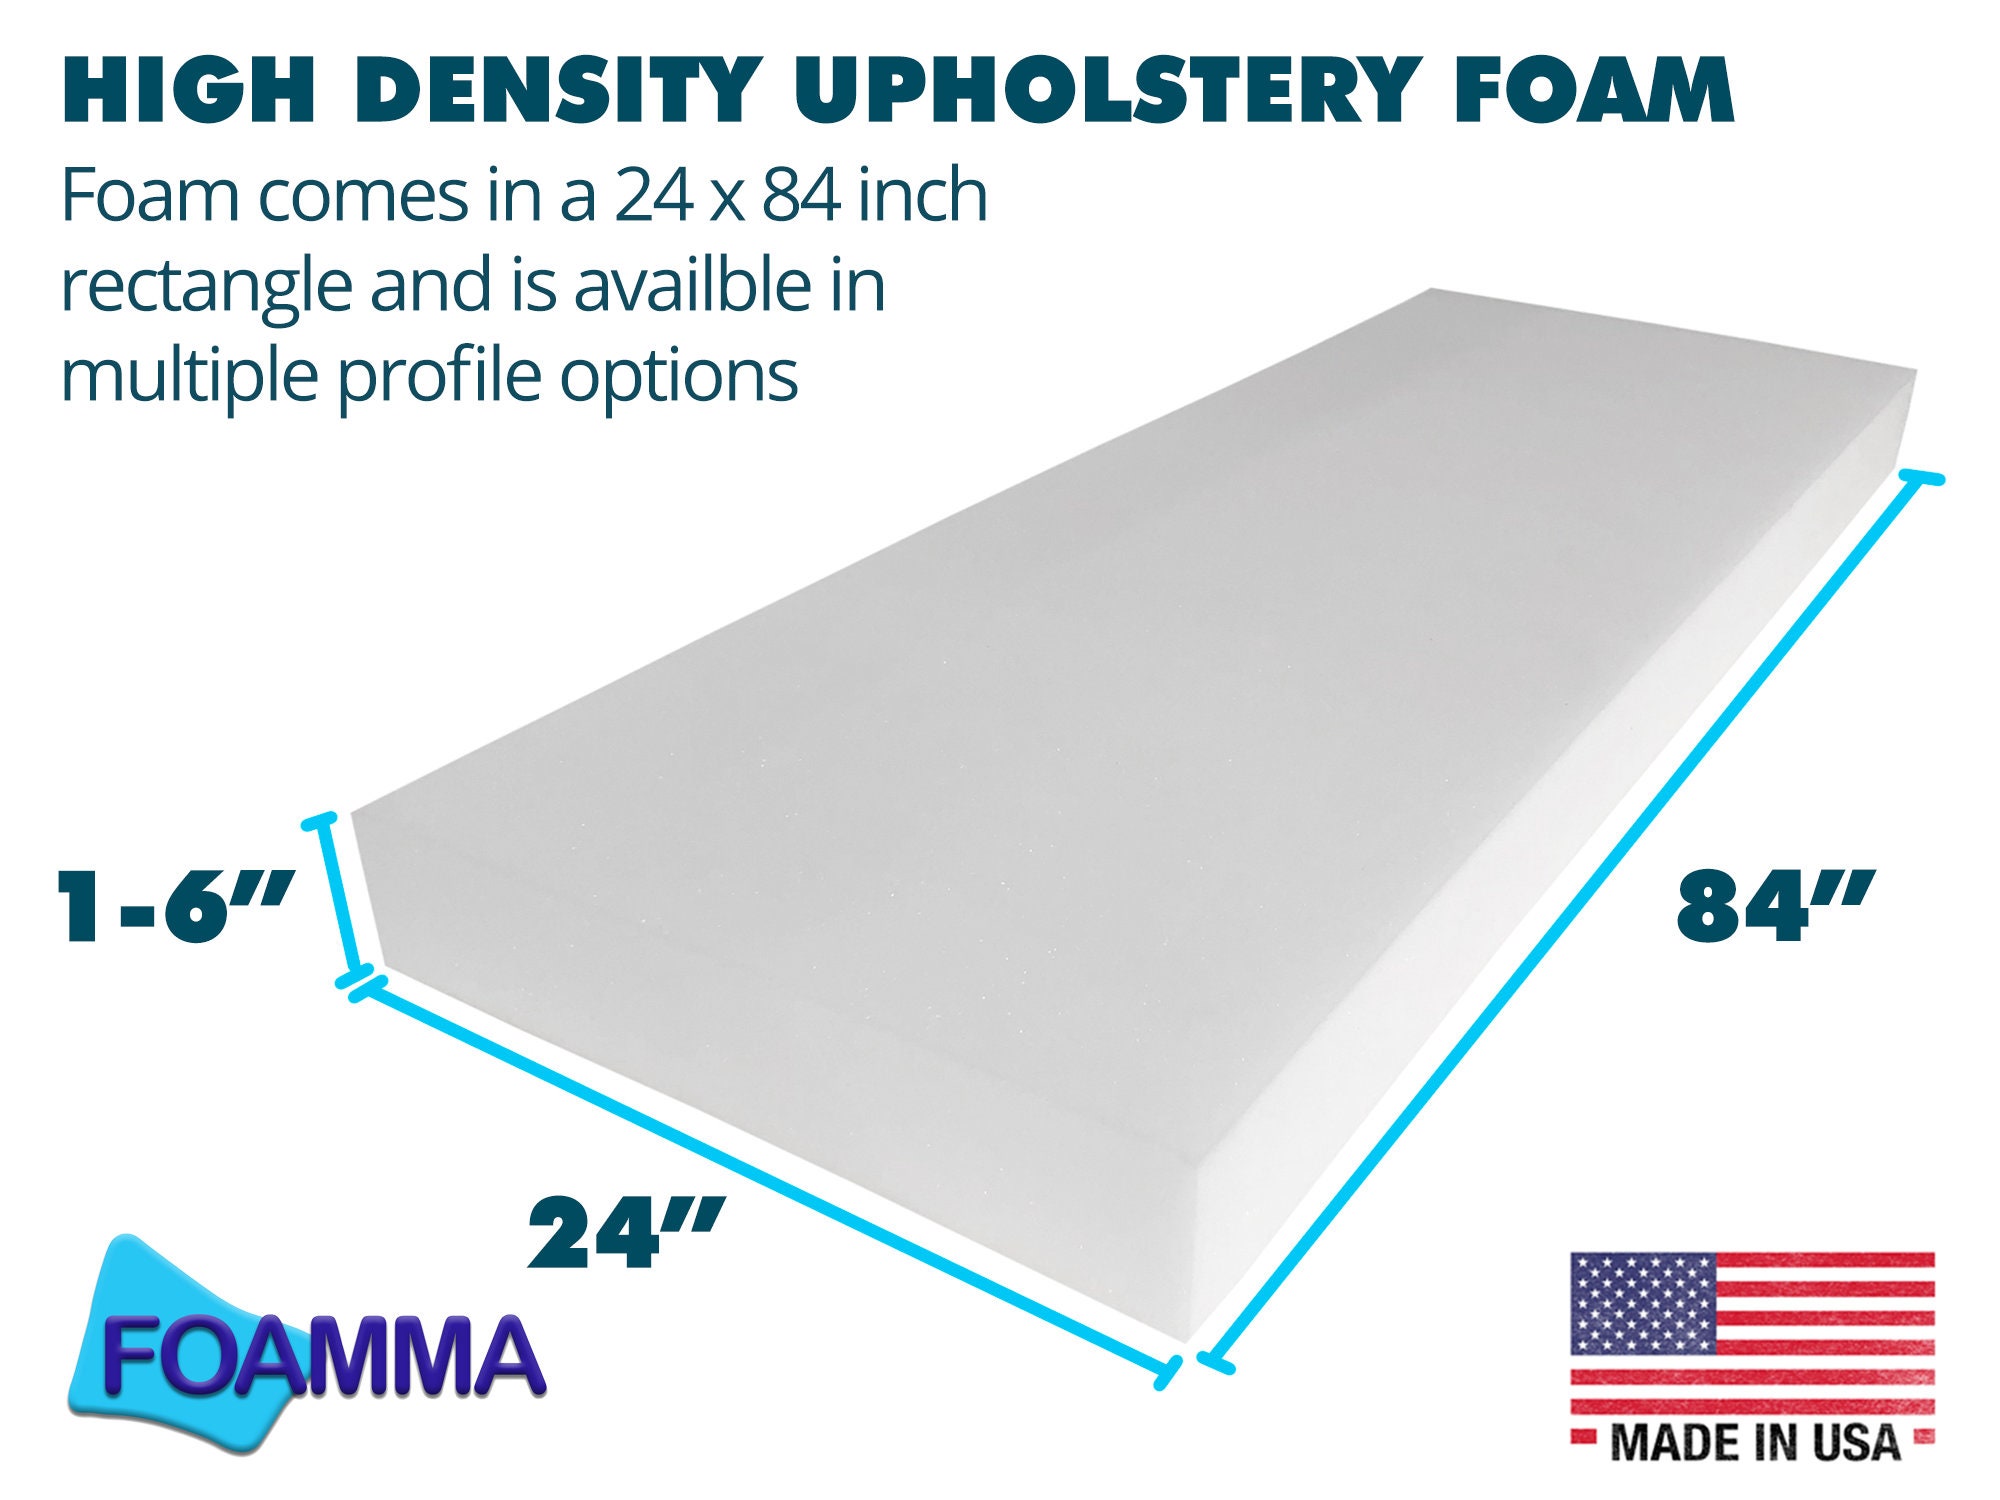 2 X 24 X 72 Wholesale Upholstery Foam Cushion, High Density, Seat  Replacement, Upholstery, Foam Padding, Made in USA 2 Through 6 Pack 